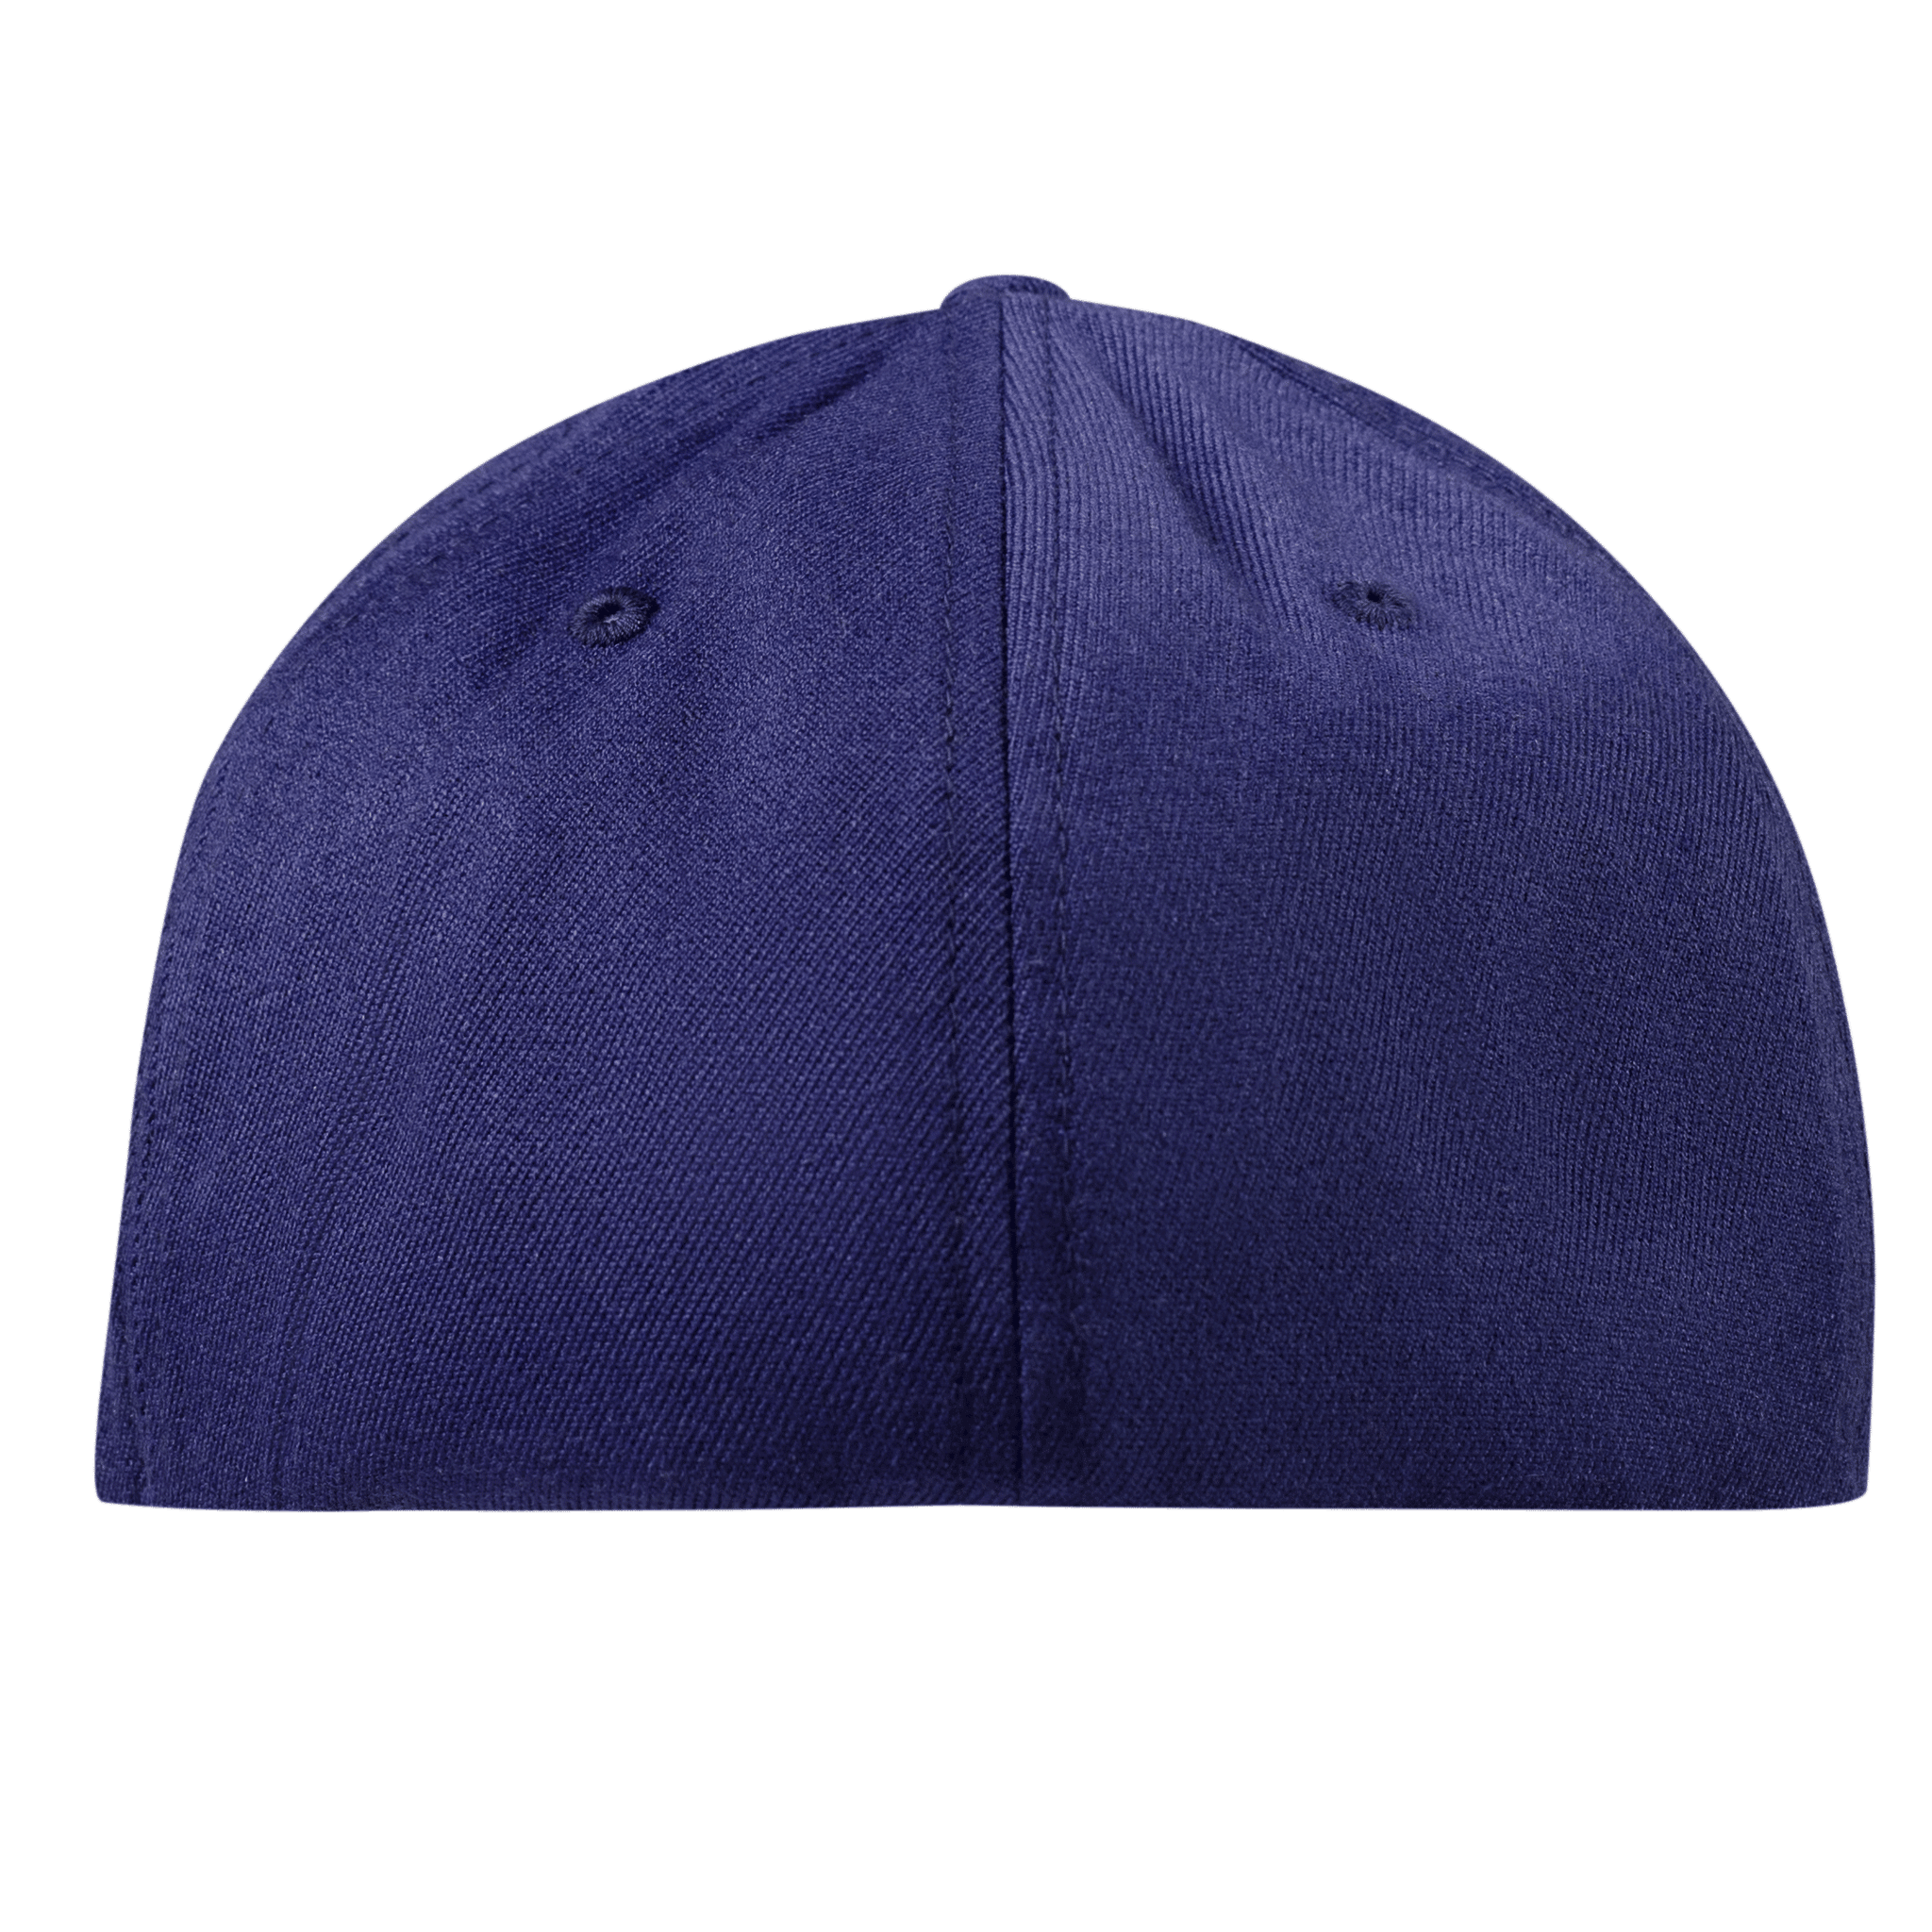 Oklahoma 46 Flexfit Fitted Back Navy